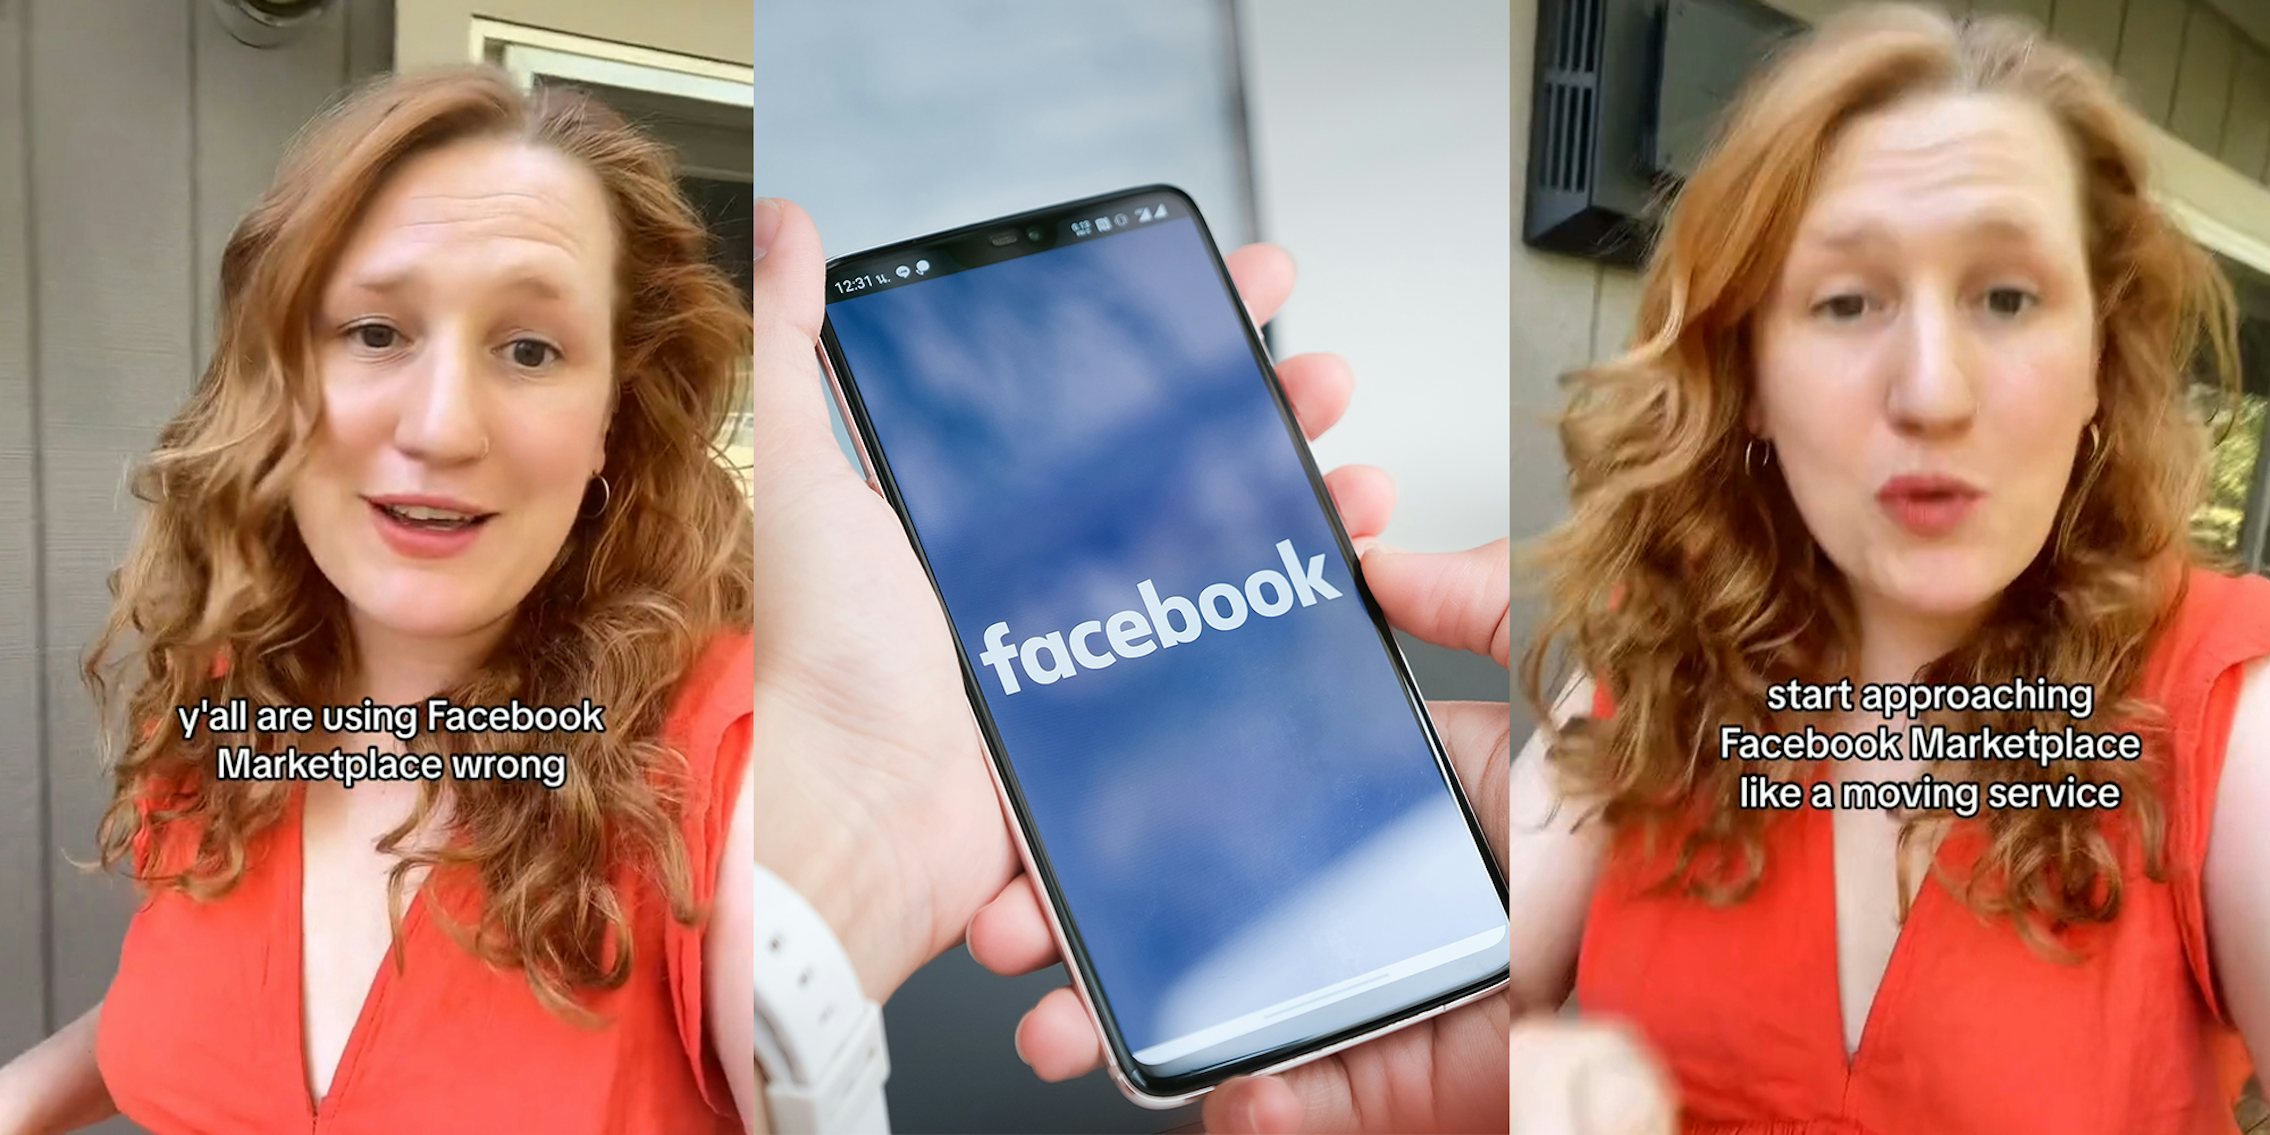 Woman shares hack to using Facebook Marketplace as a 'moving service'